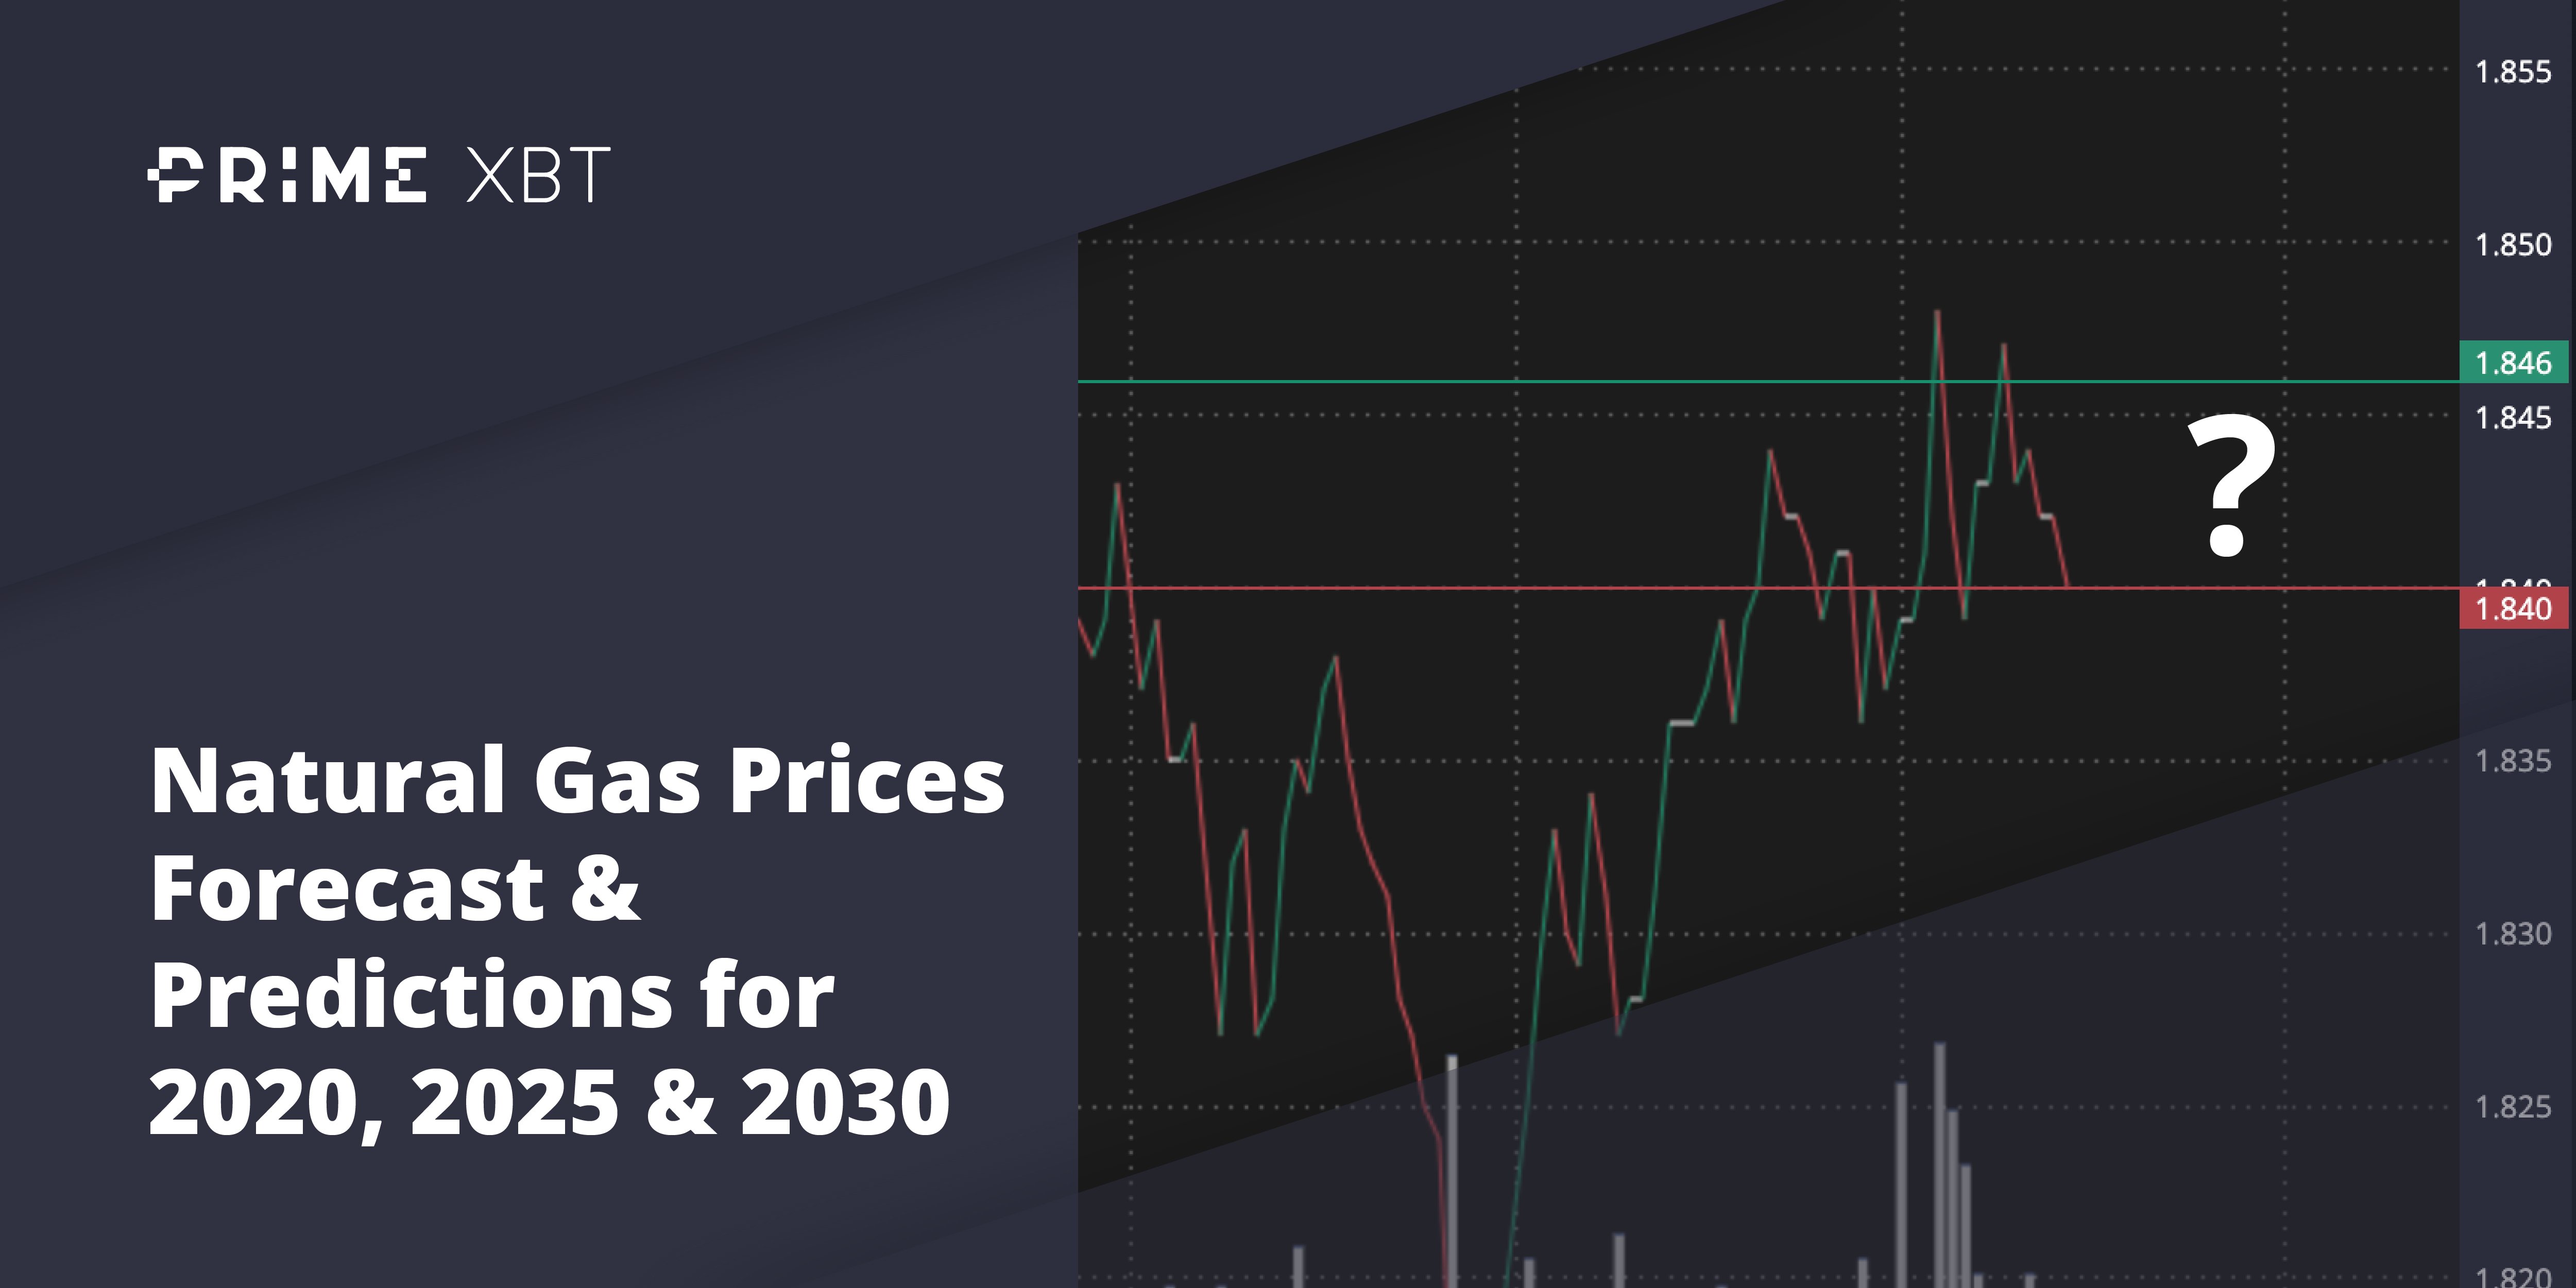 Natural Gas Prices Forecast & Predictions for 2021, 2022, 2023, 2025